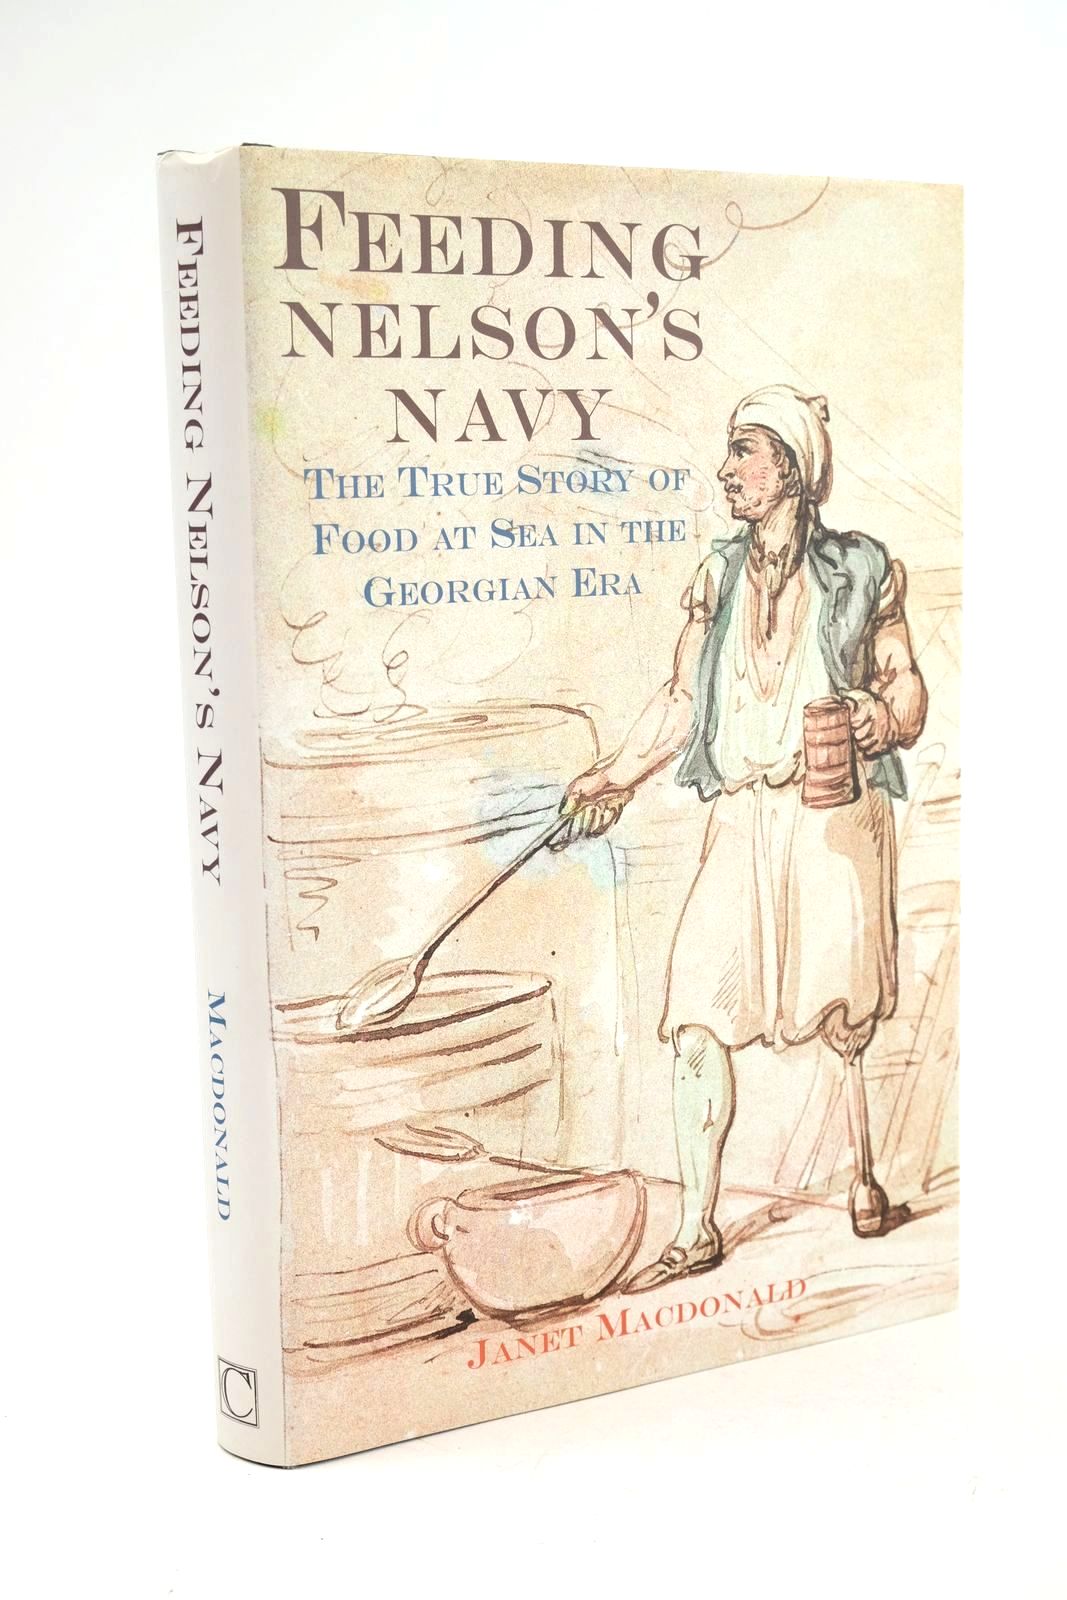 Photo of FEEDING NELSON'S NAVY written by Macdonald, Janet W. published by Chatham Publishing (STOCK CODE: 1325118)  for sale by Stella & Rose's Books